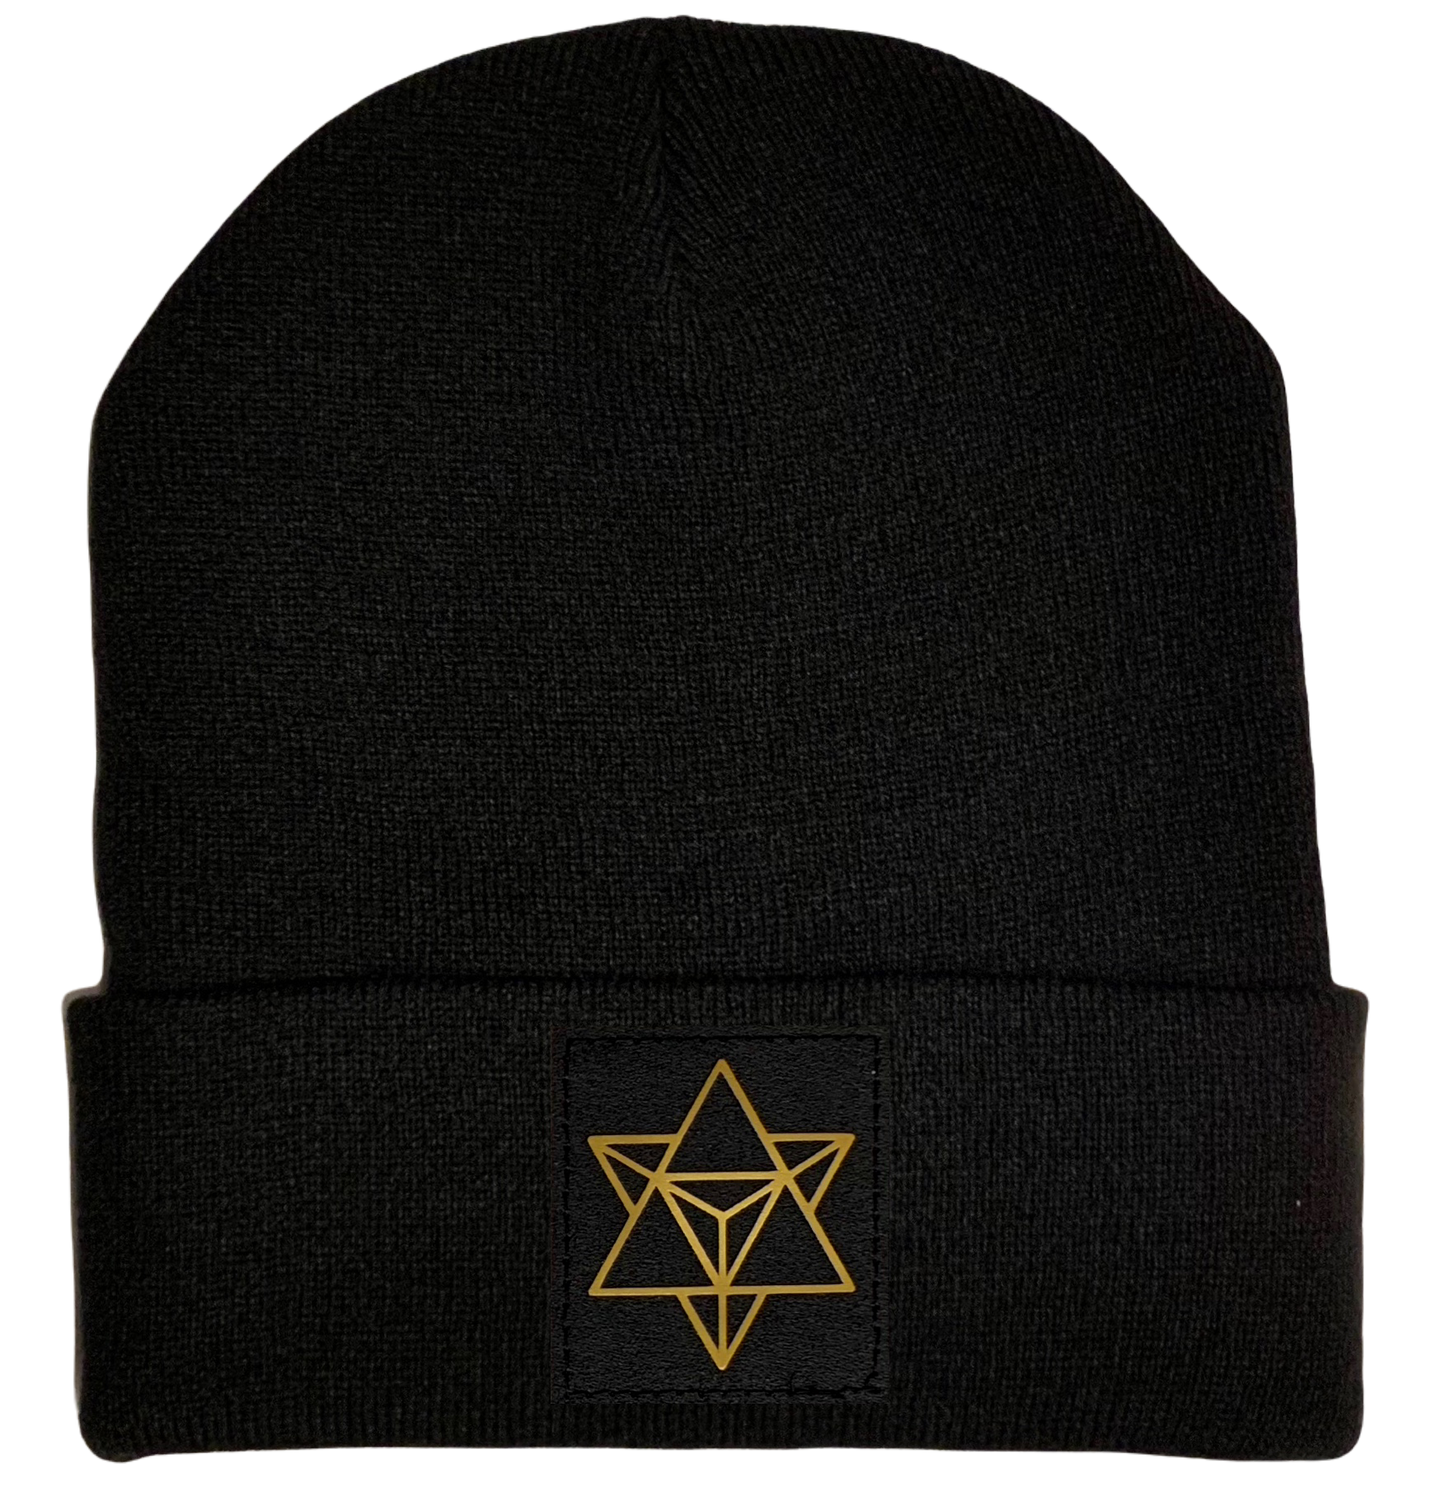 Beanie - Black cuffed w Hand Made Black and Gold Merkaba, Vegan Leather patch over your Third Eye